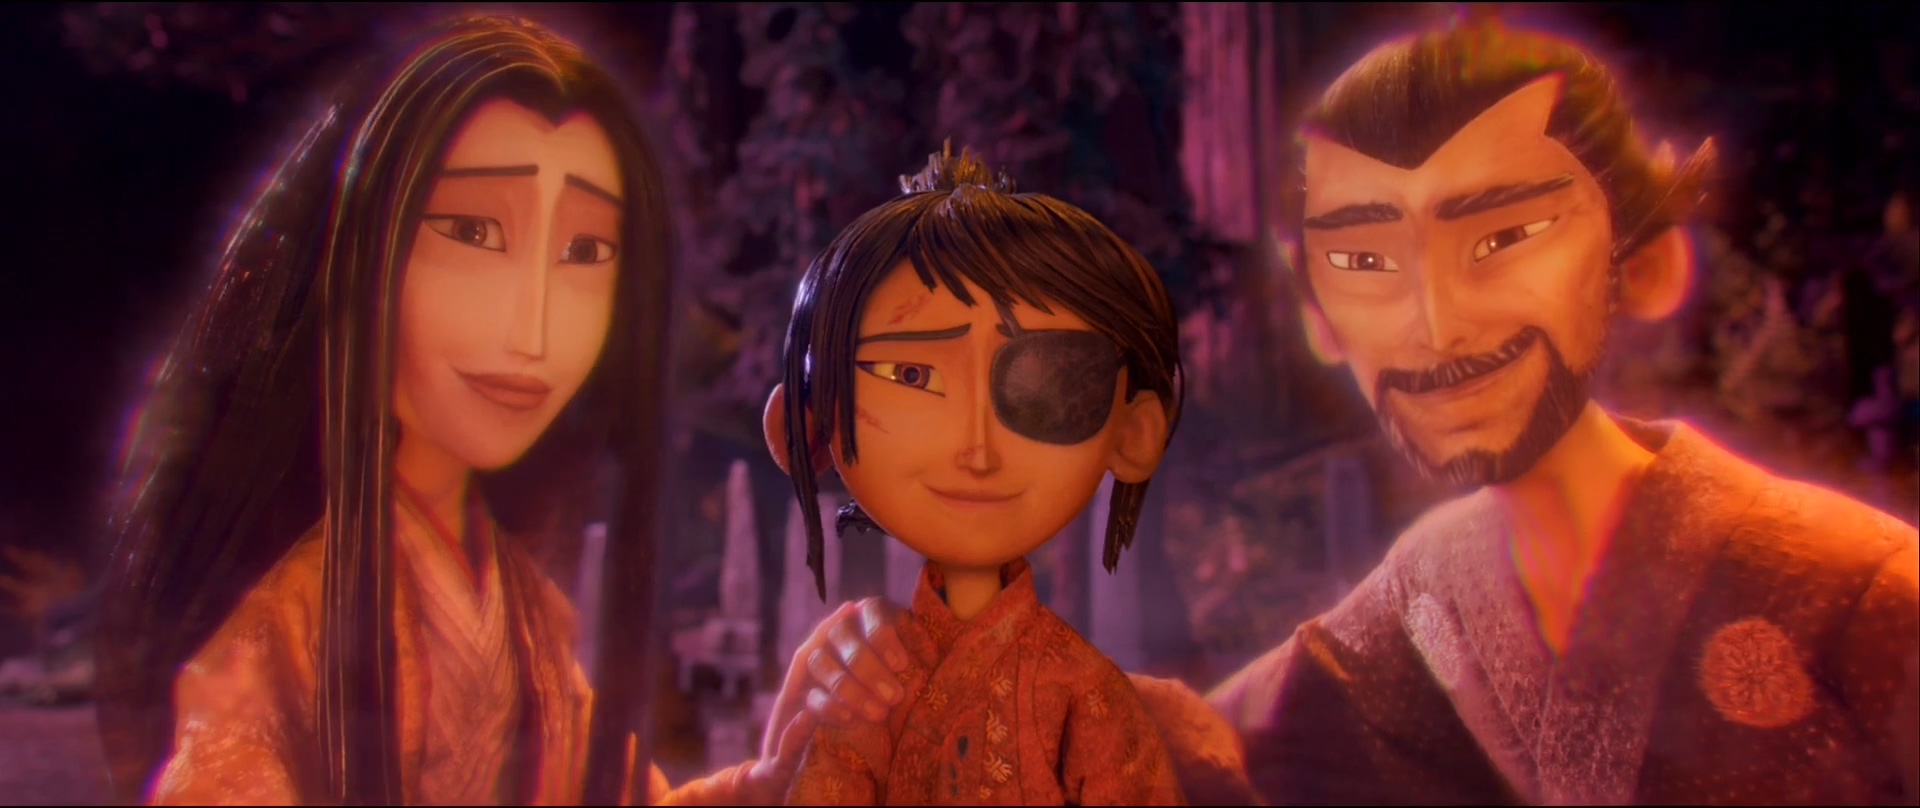 kubo_and_the_two_strings_213208_250.jpg